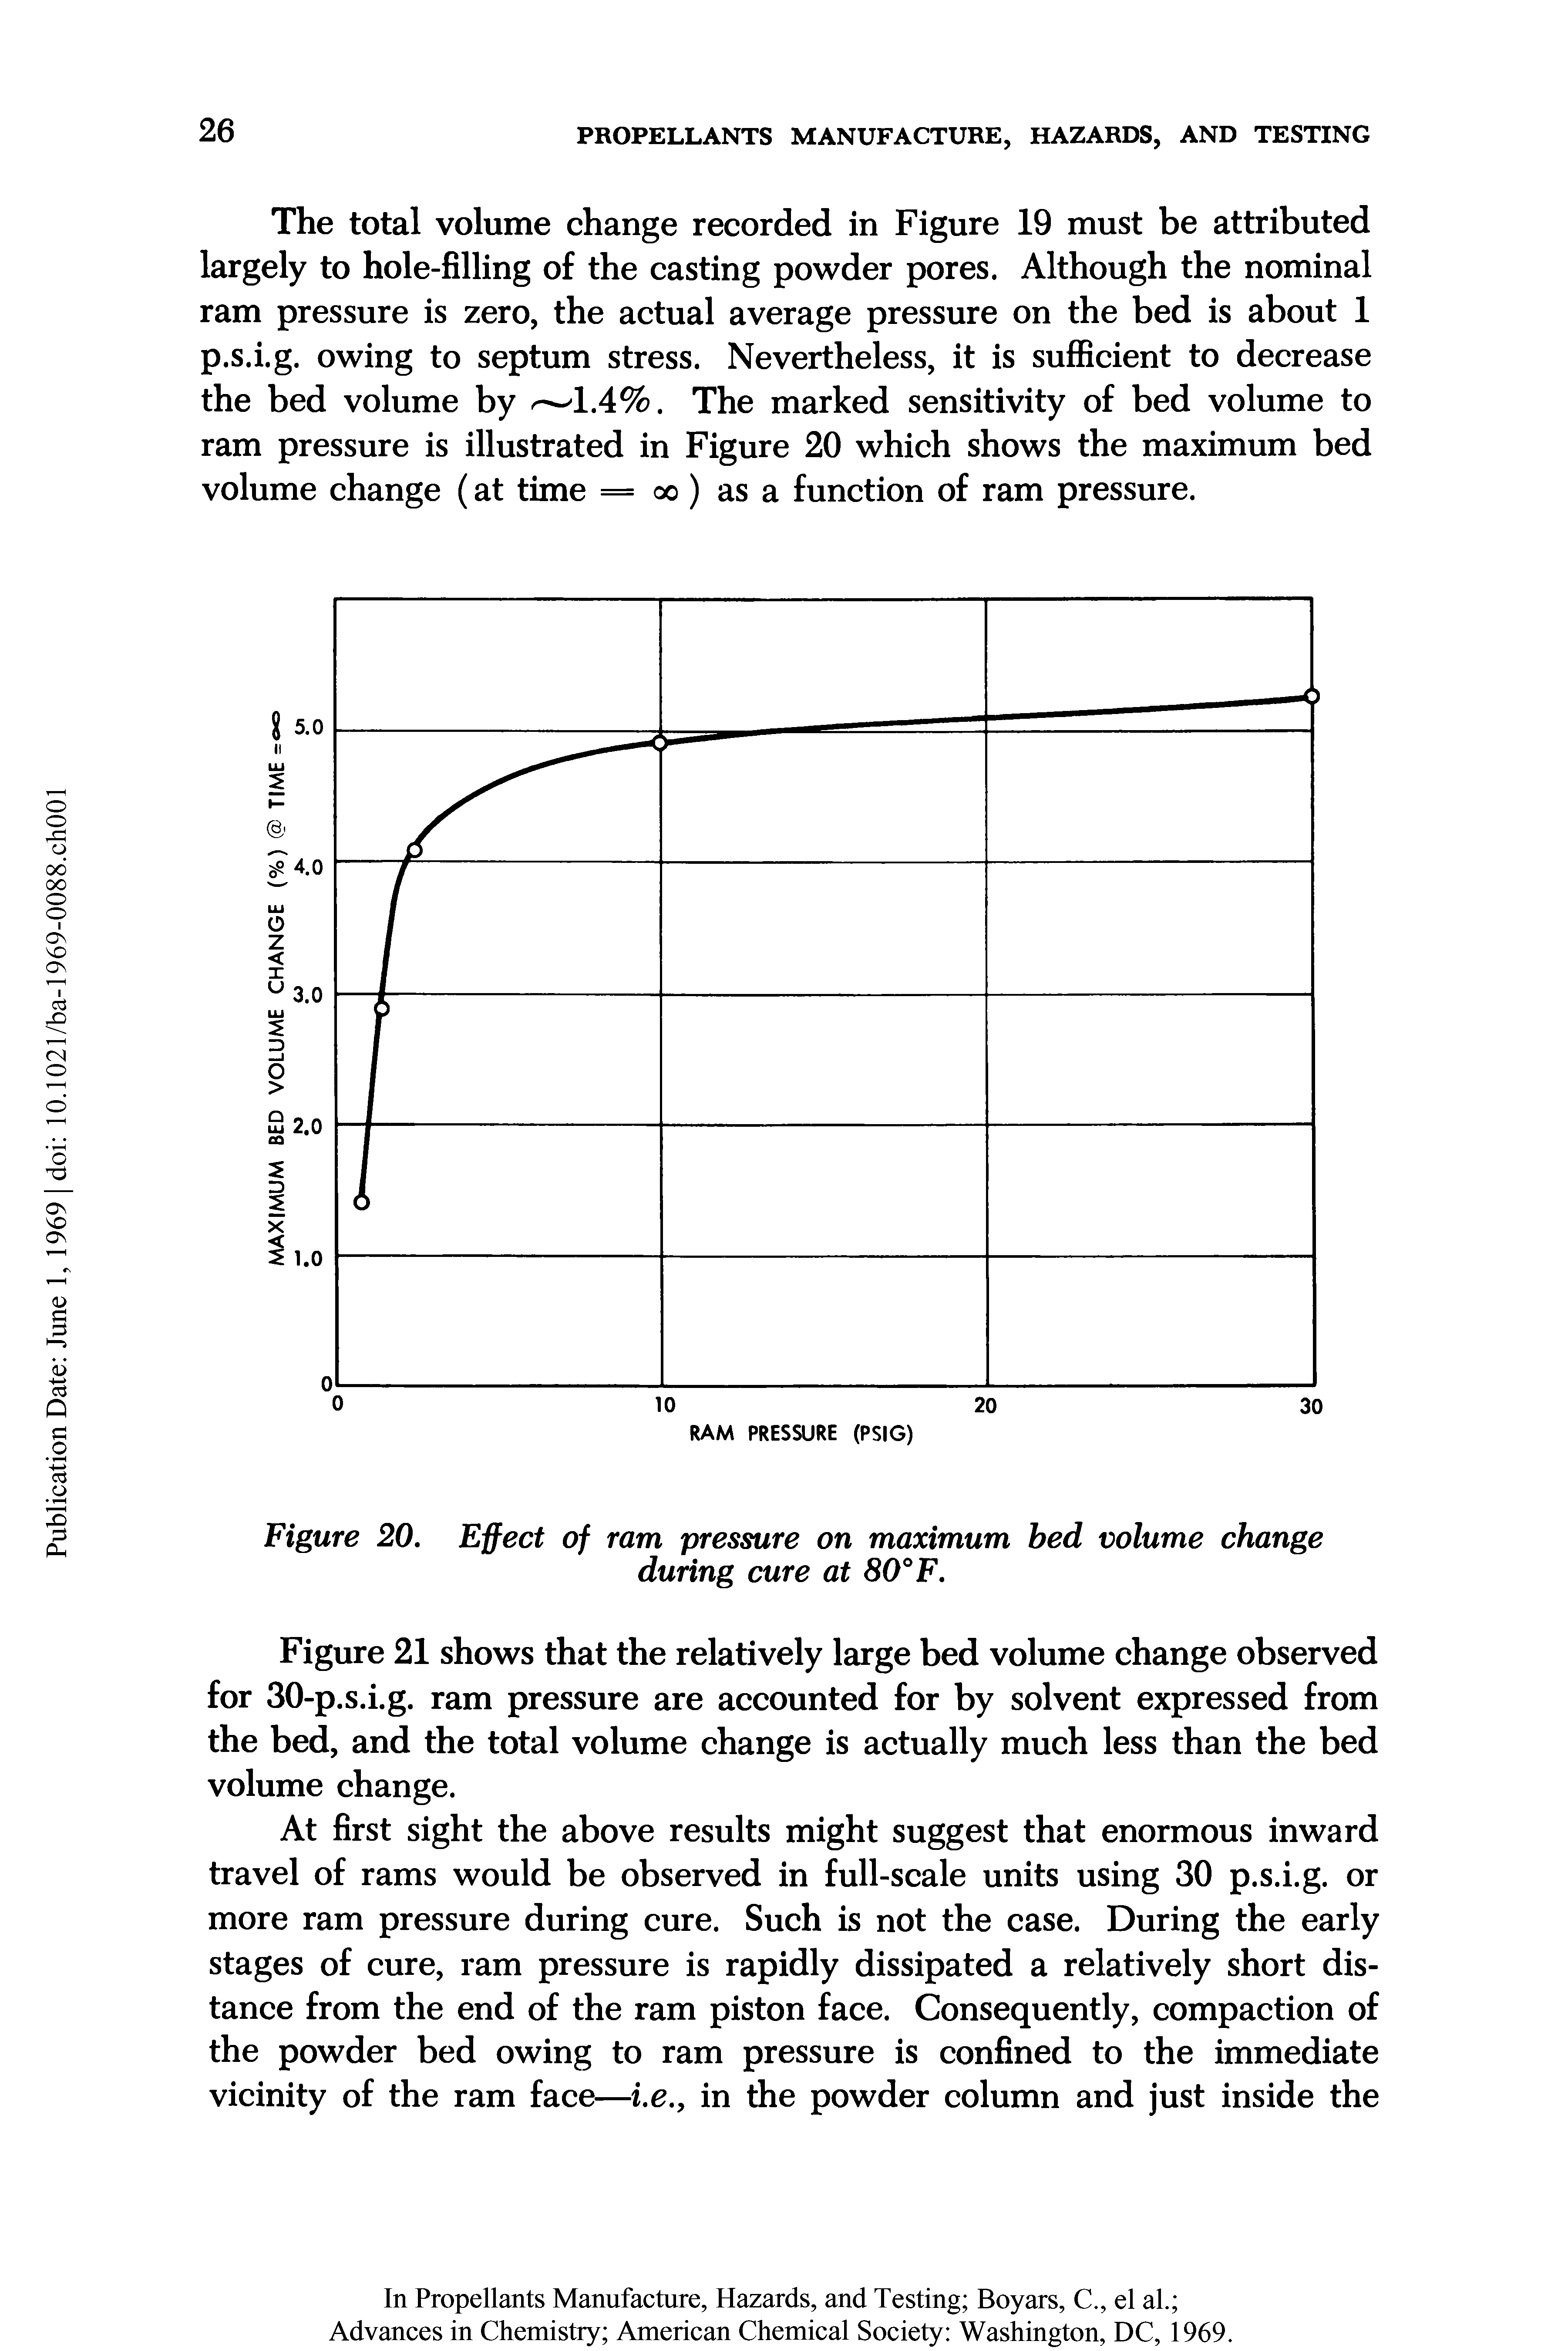 Figure 20. Effect of ram pressure on maximum bed volume change during cure at 80° F.